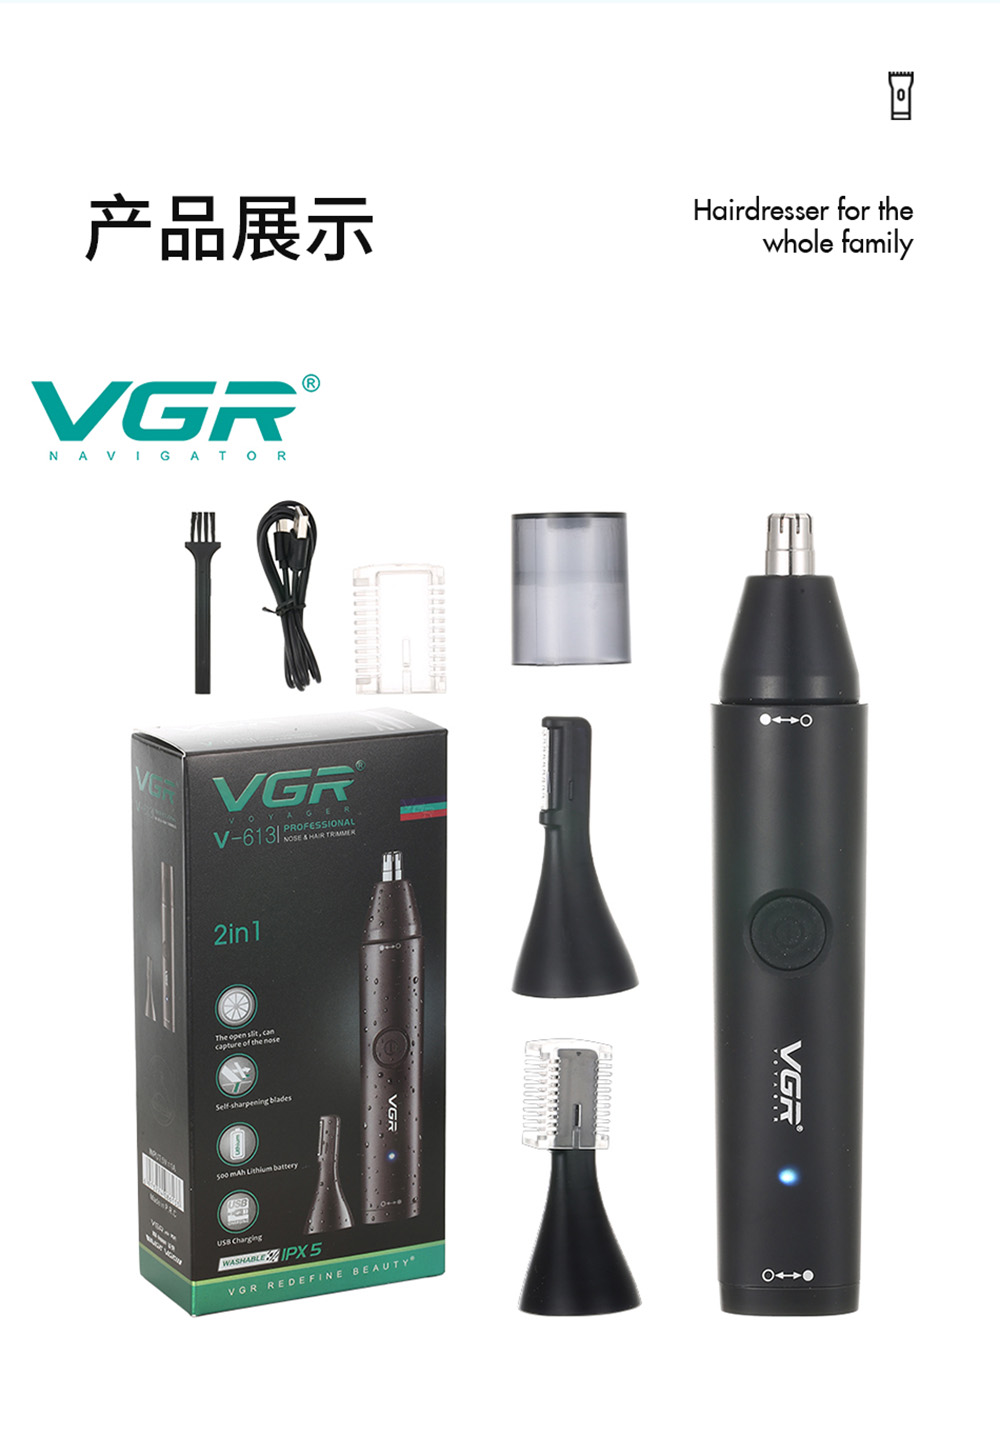 VGR V-613 2-in-1 Electric Nose Hair Trimmer, Portable Rechargeable Hair Remover, Support Body Washing, 150min Runtime